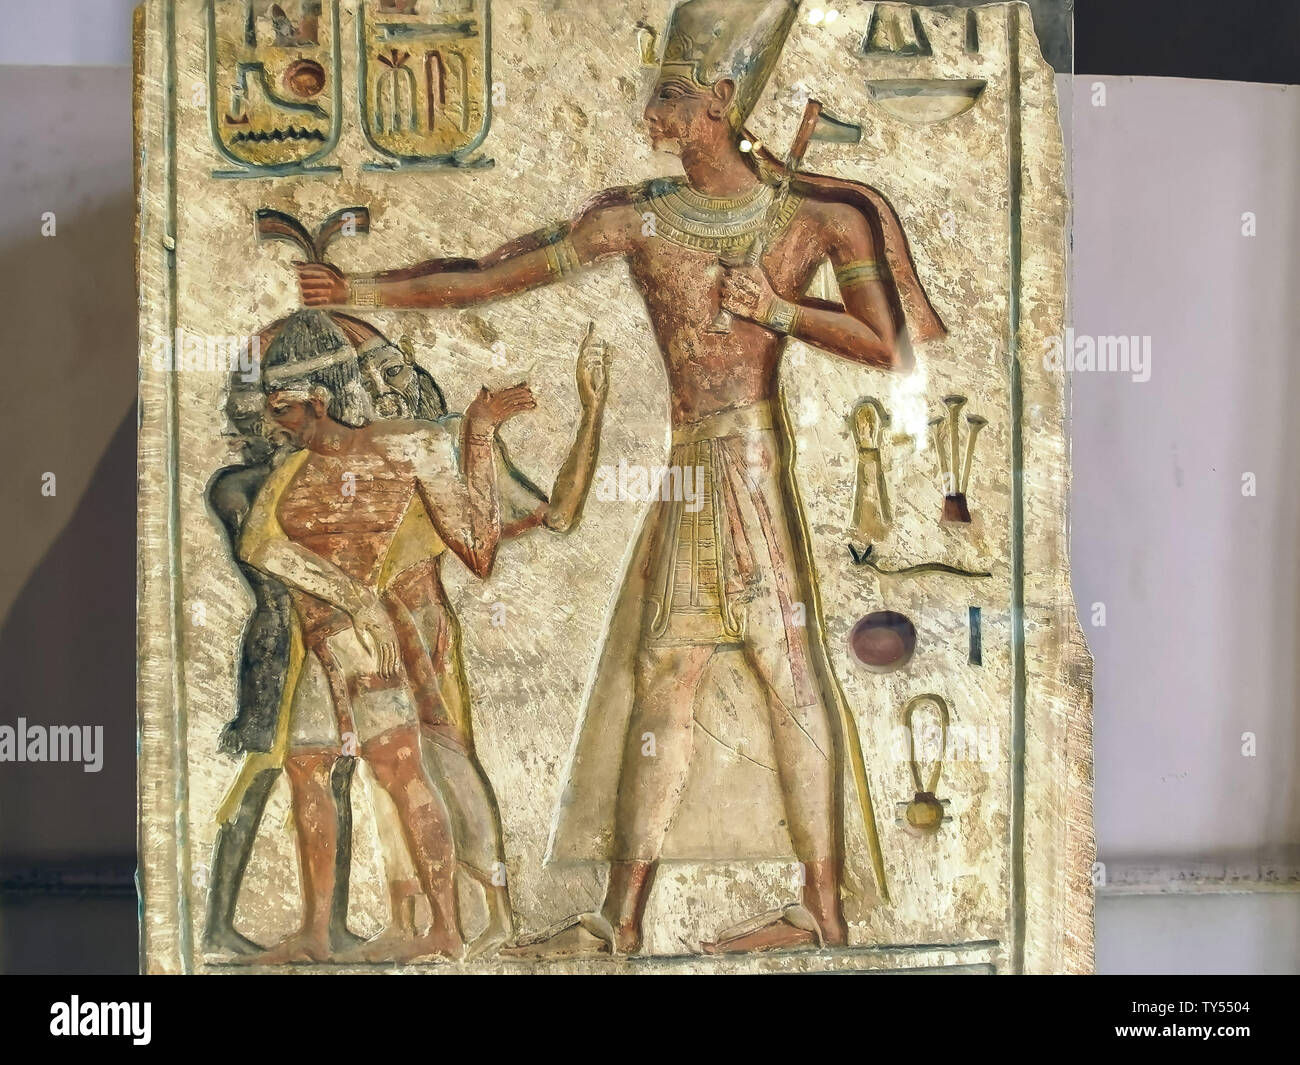 CAIRO, EGYPT- SEPTEMBER, 26, 2016: shot of a stela engraved with image of ramses II in cairo Stock Photo